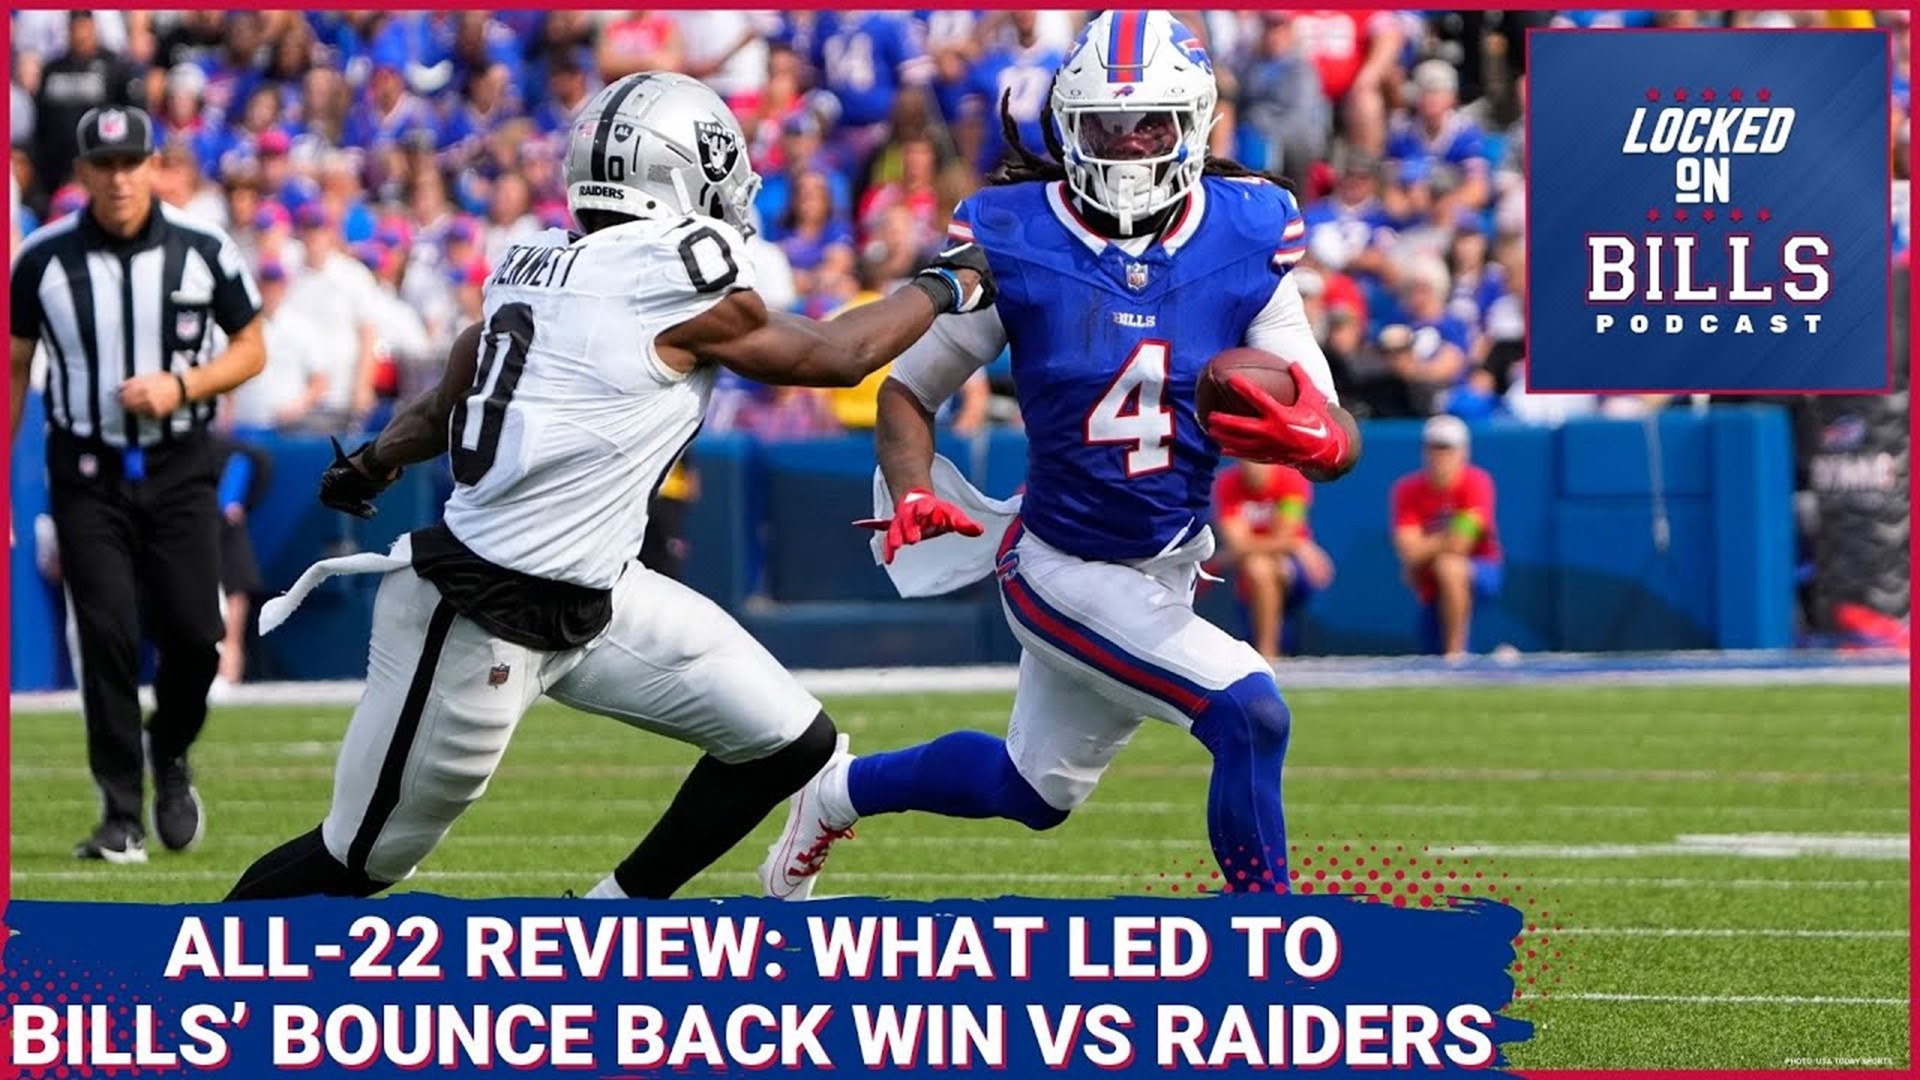 All-22 Review. Why the Buffalo Bills and Josh Allen were able to bounce back in win over Raiders